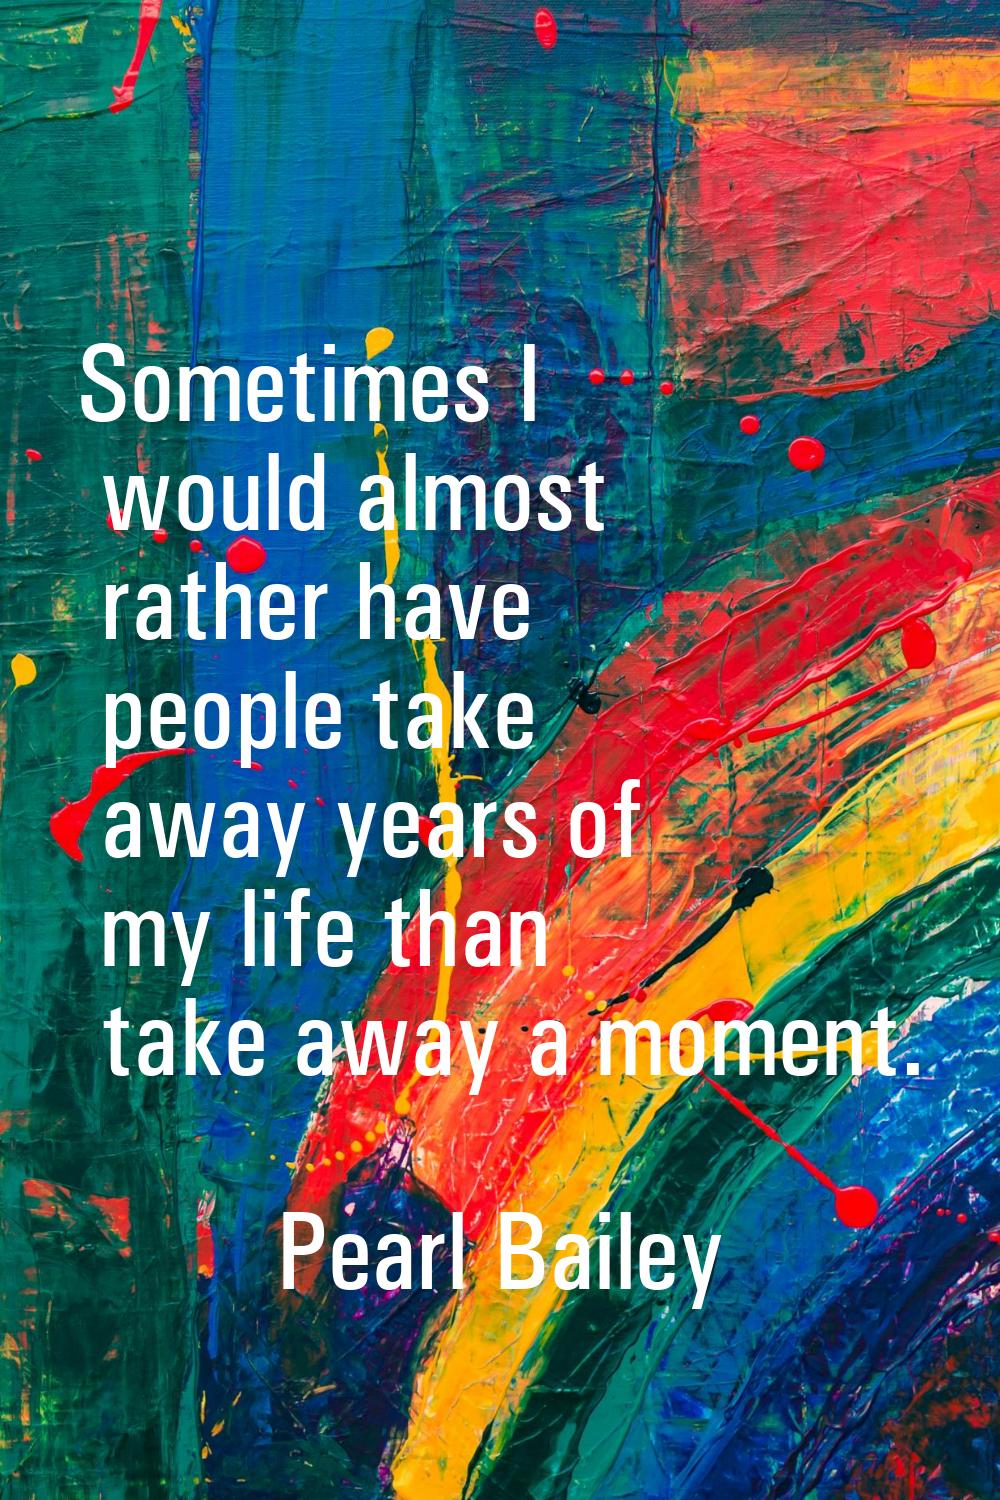 Sometimes I would almost rather have people take away years of my life than take away a moment.